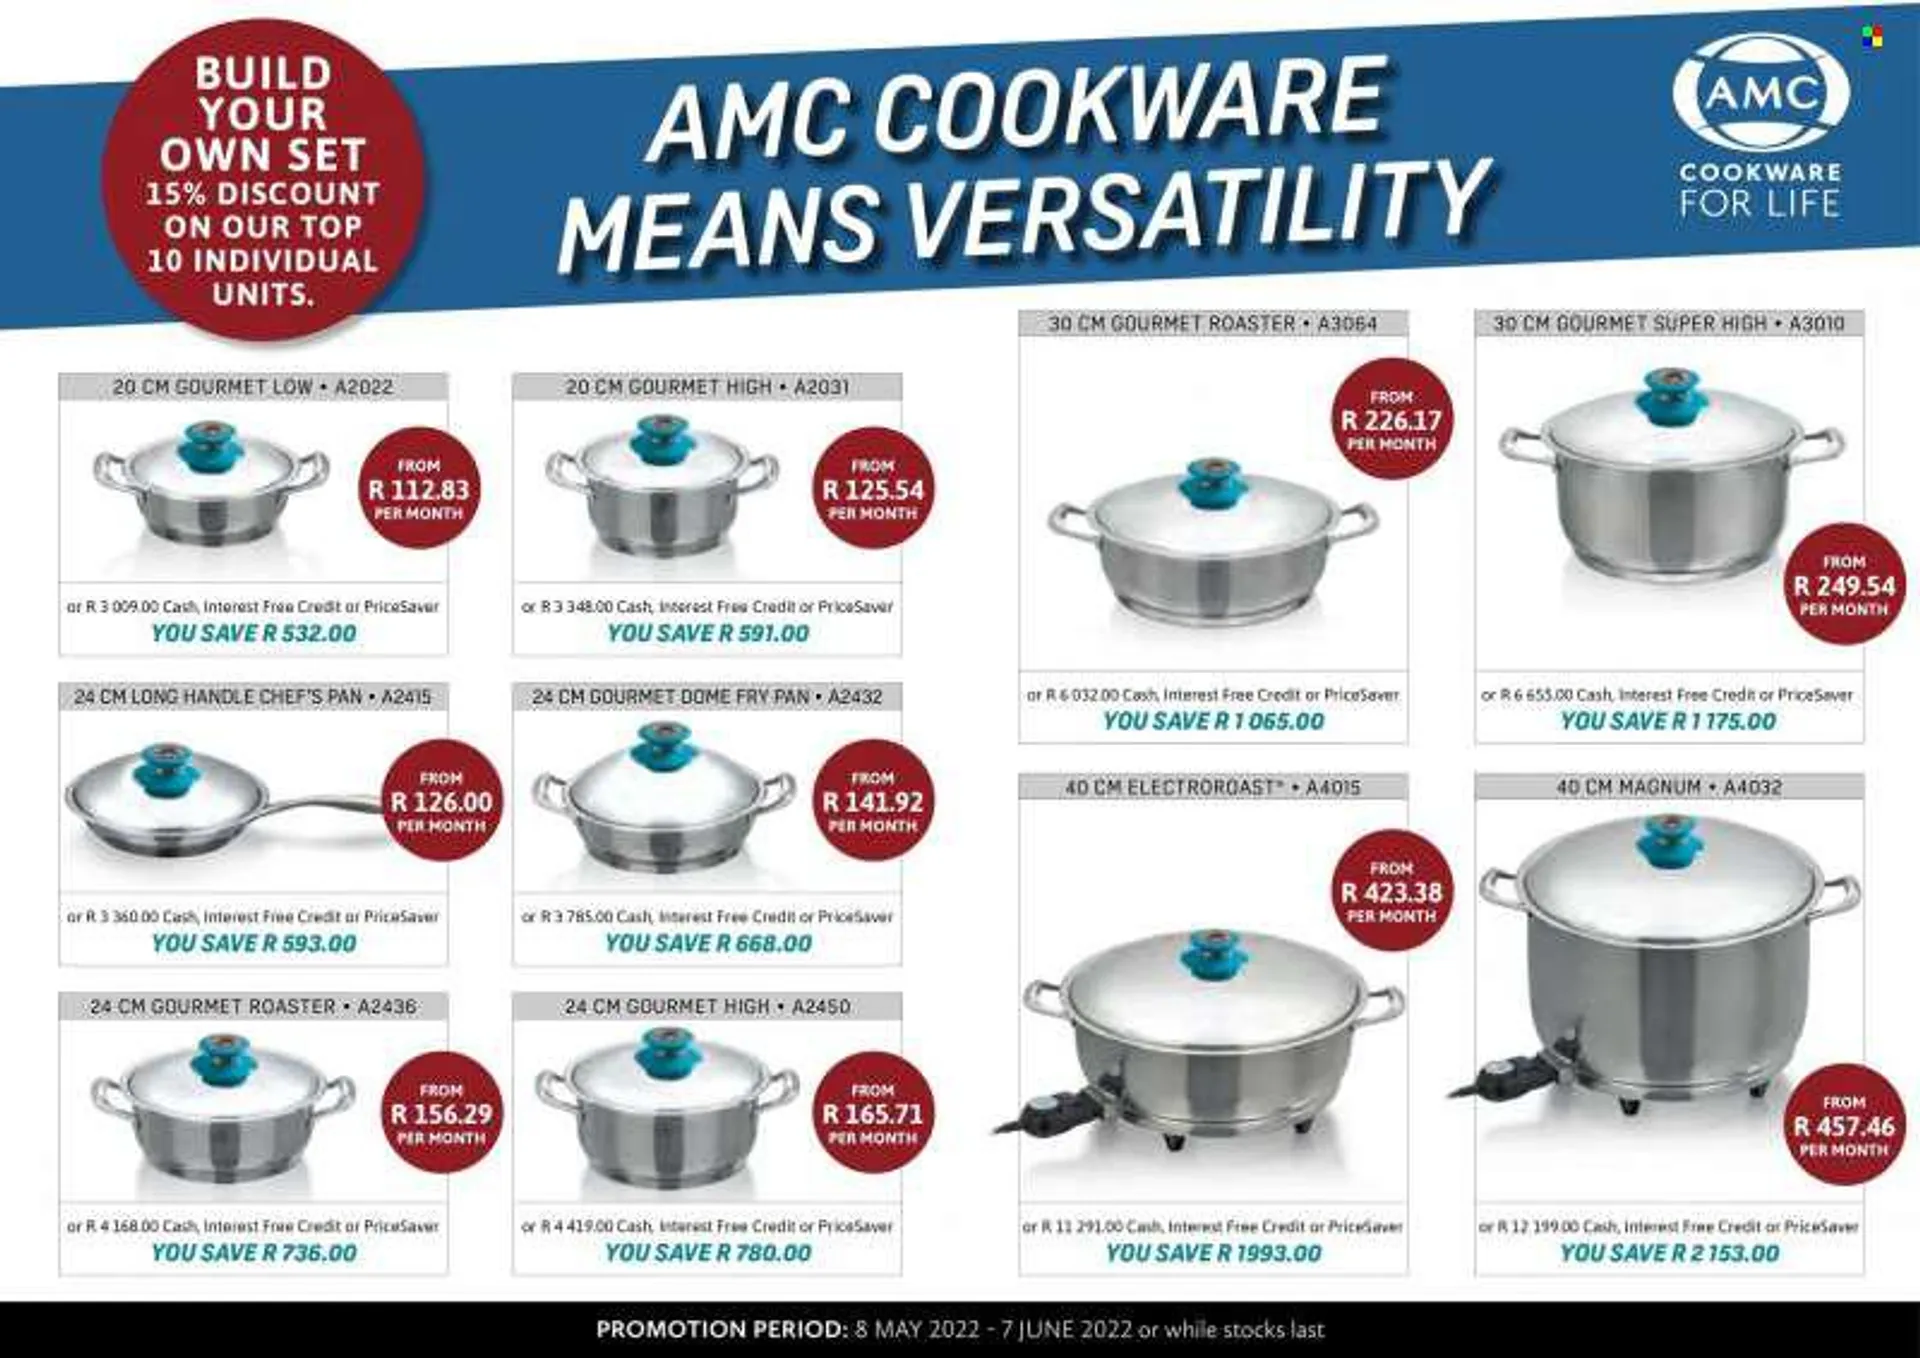 AMC Cookware catalogue  - 08/05/2022 - 07/06/2022. - 8 May 7 June 2022 - Page 3